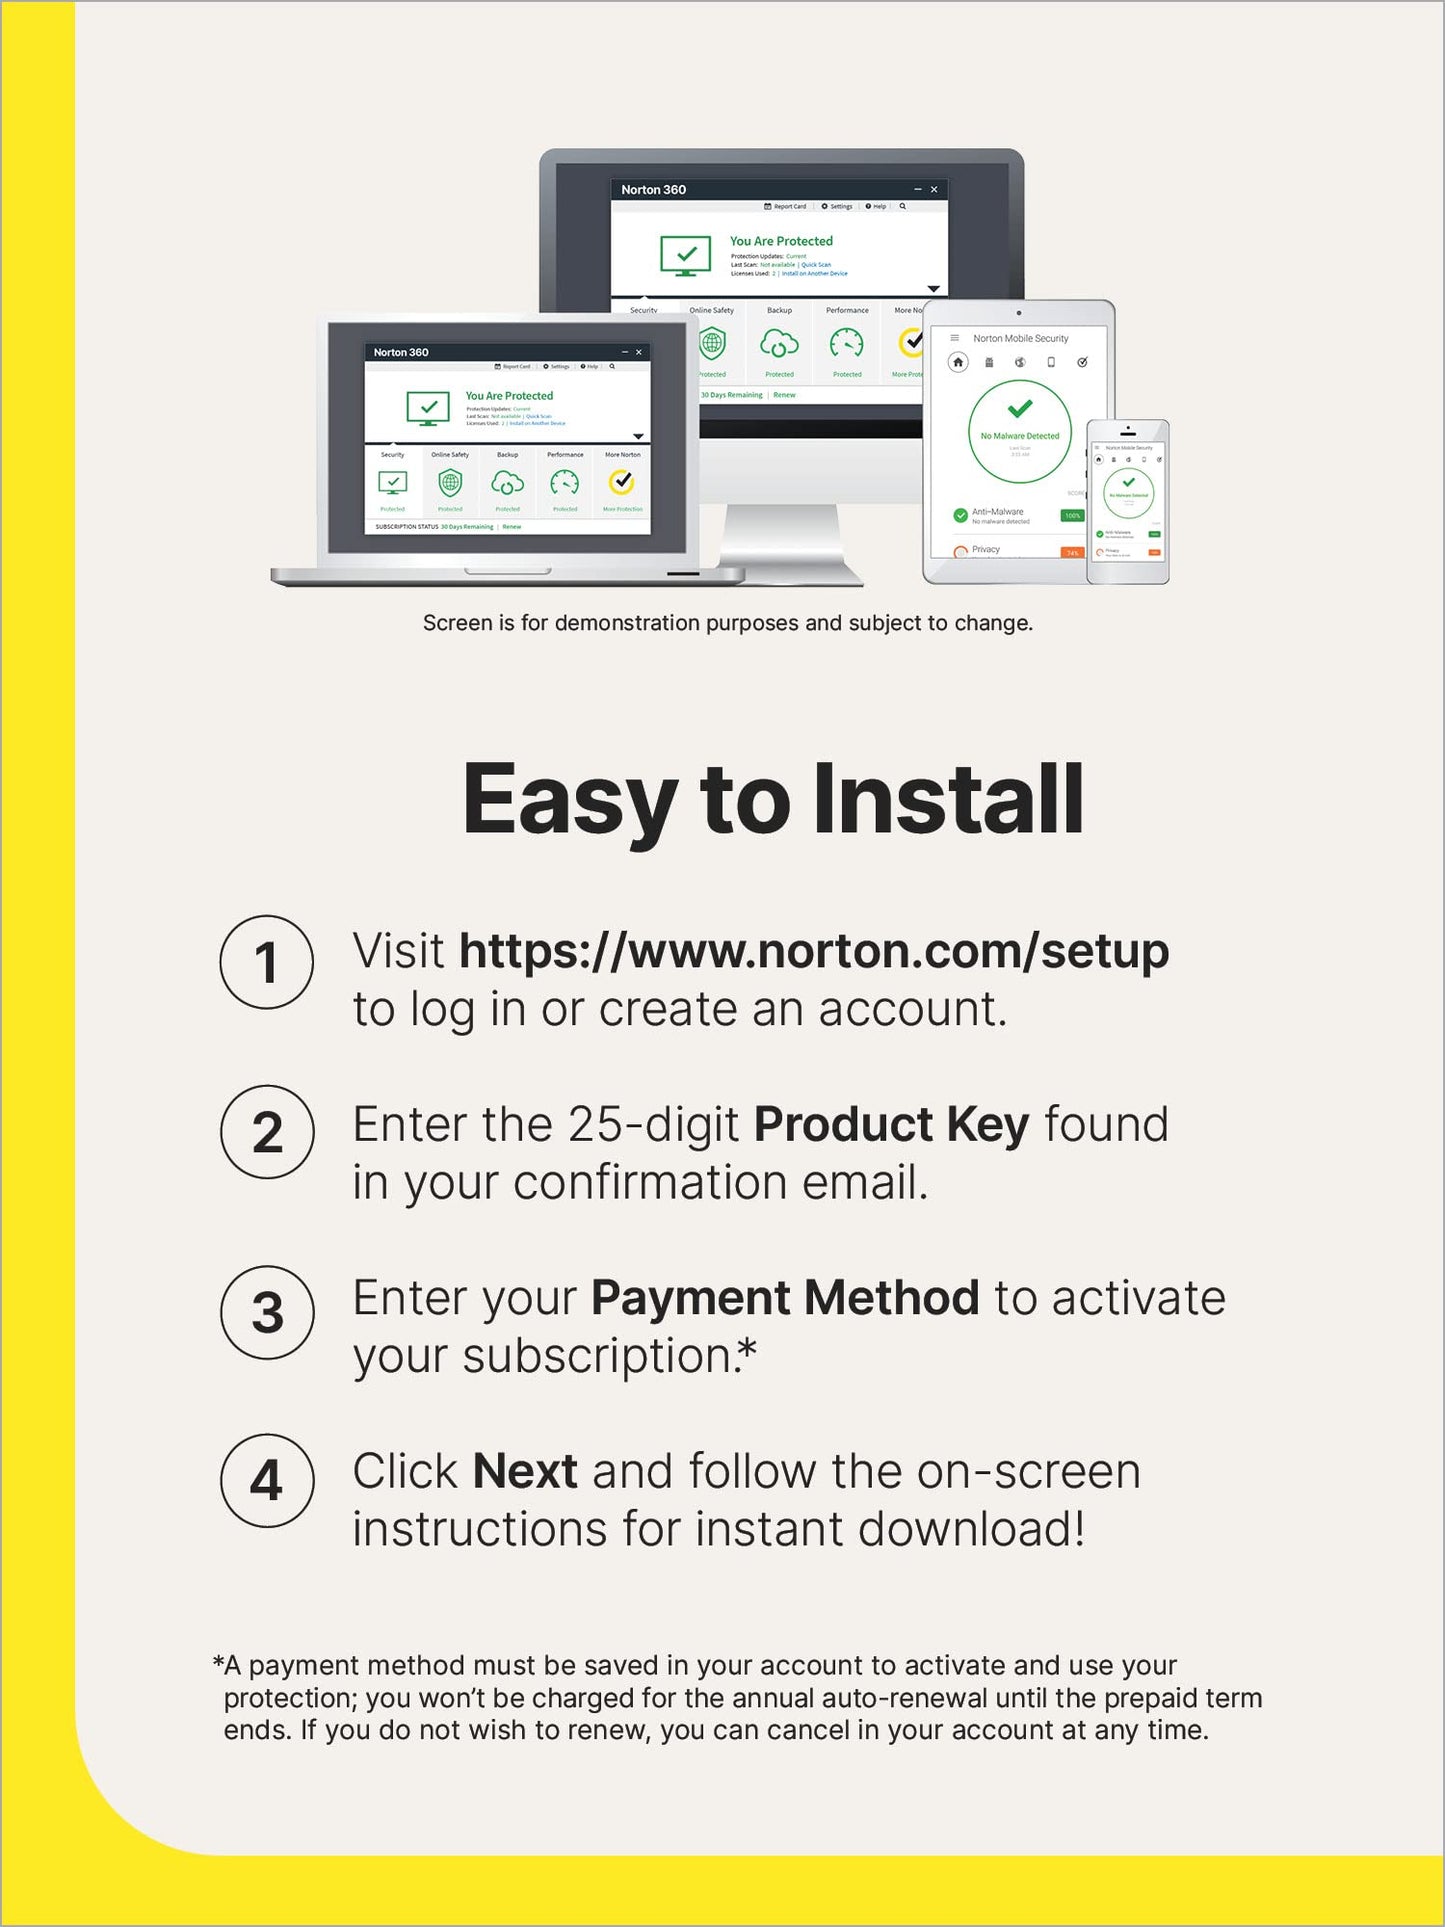 Norton 360 Standard 2024, Antivirus software for 1 Device with Auto Renewal – Includes VPN, PC Cloud Backup & Dark Web Monitoring [Key Card]